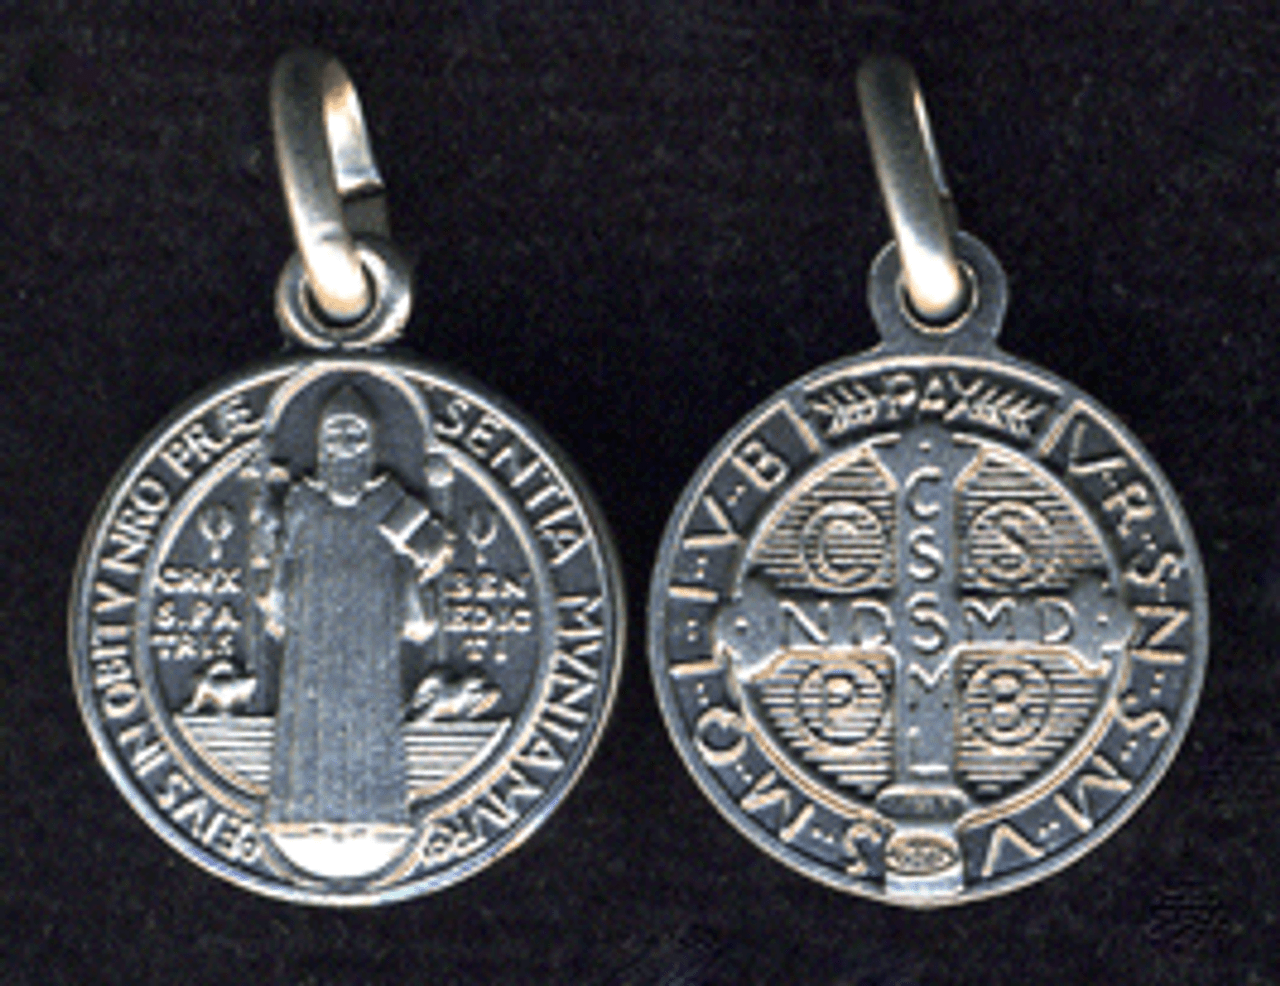 French St. Benedict Medal - Nickel Silver - .75